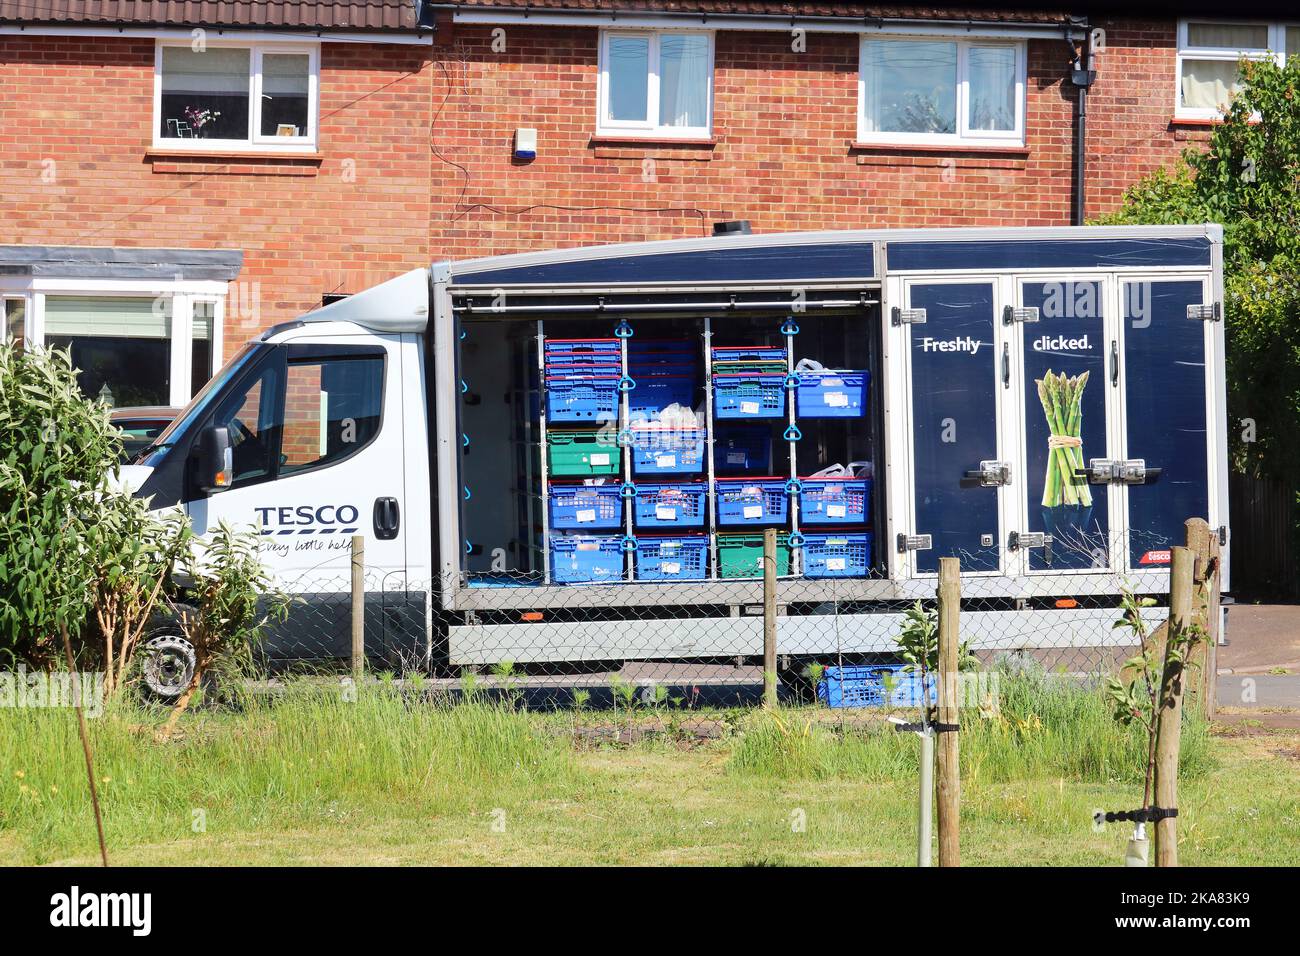 Tesco home delivery van parked. Making online deliveries to private houses. Stock Photo